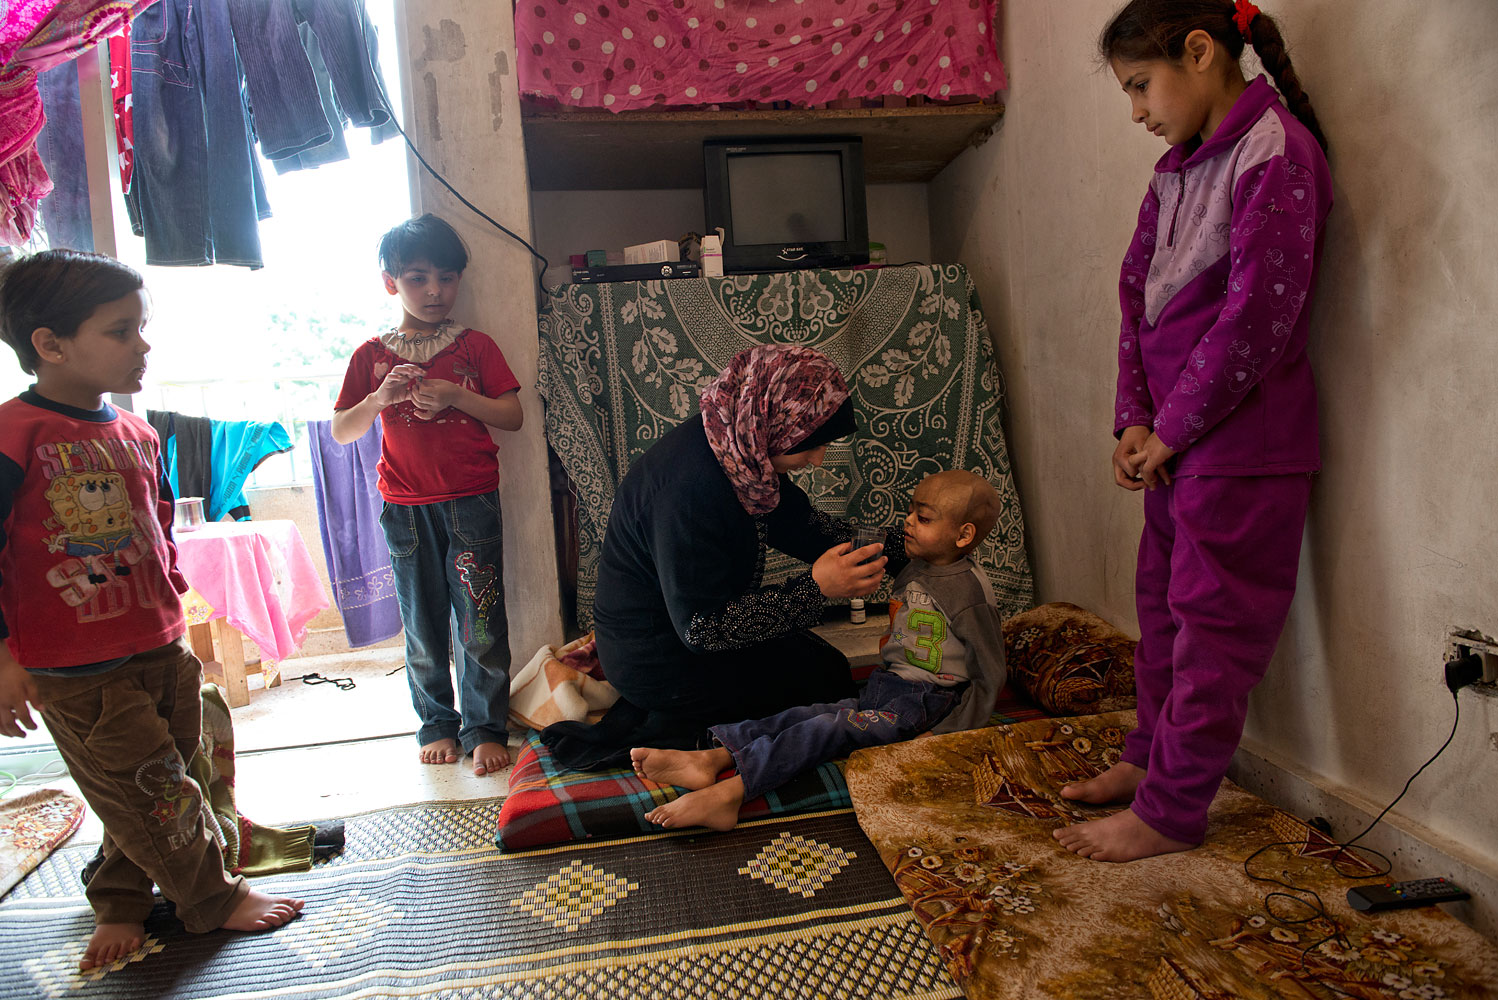 Feryal, 29, gives water to Zacharia, her four-year-old son, in the apartment they live in in Halat. He is dying of cancer. In Syria, the trip to hospital became too dangerous. “I was afraid,” said Feryal. By the time they reached Lebanon, the cancer had spread to his brain, she says, adding: “I failed him.”